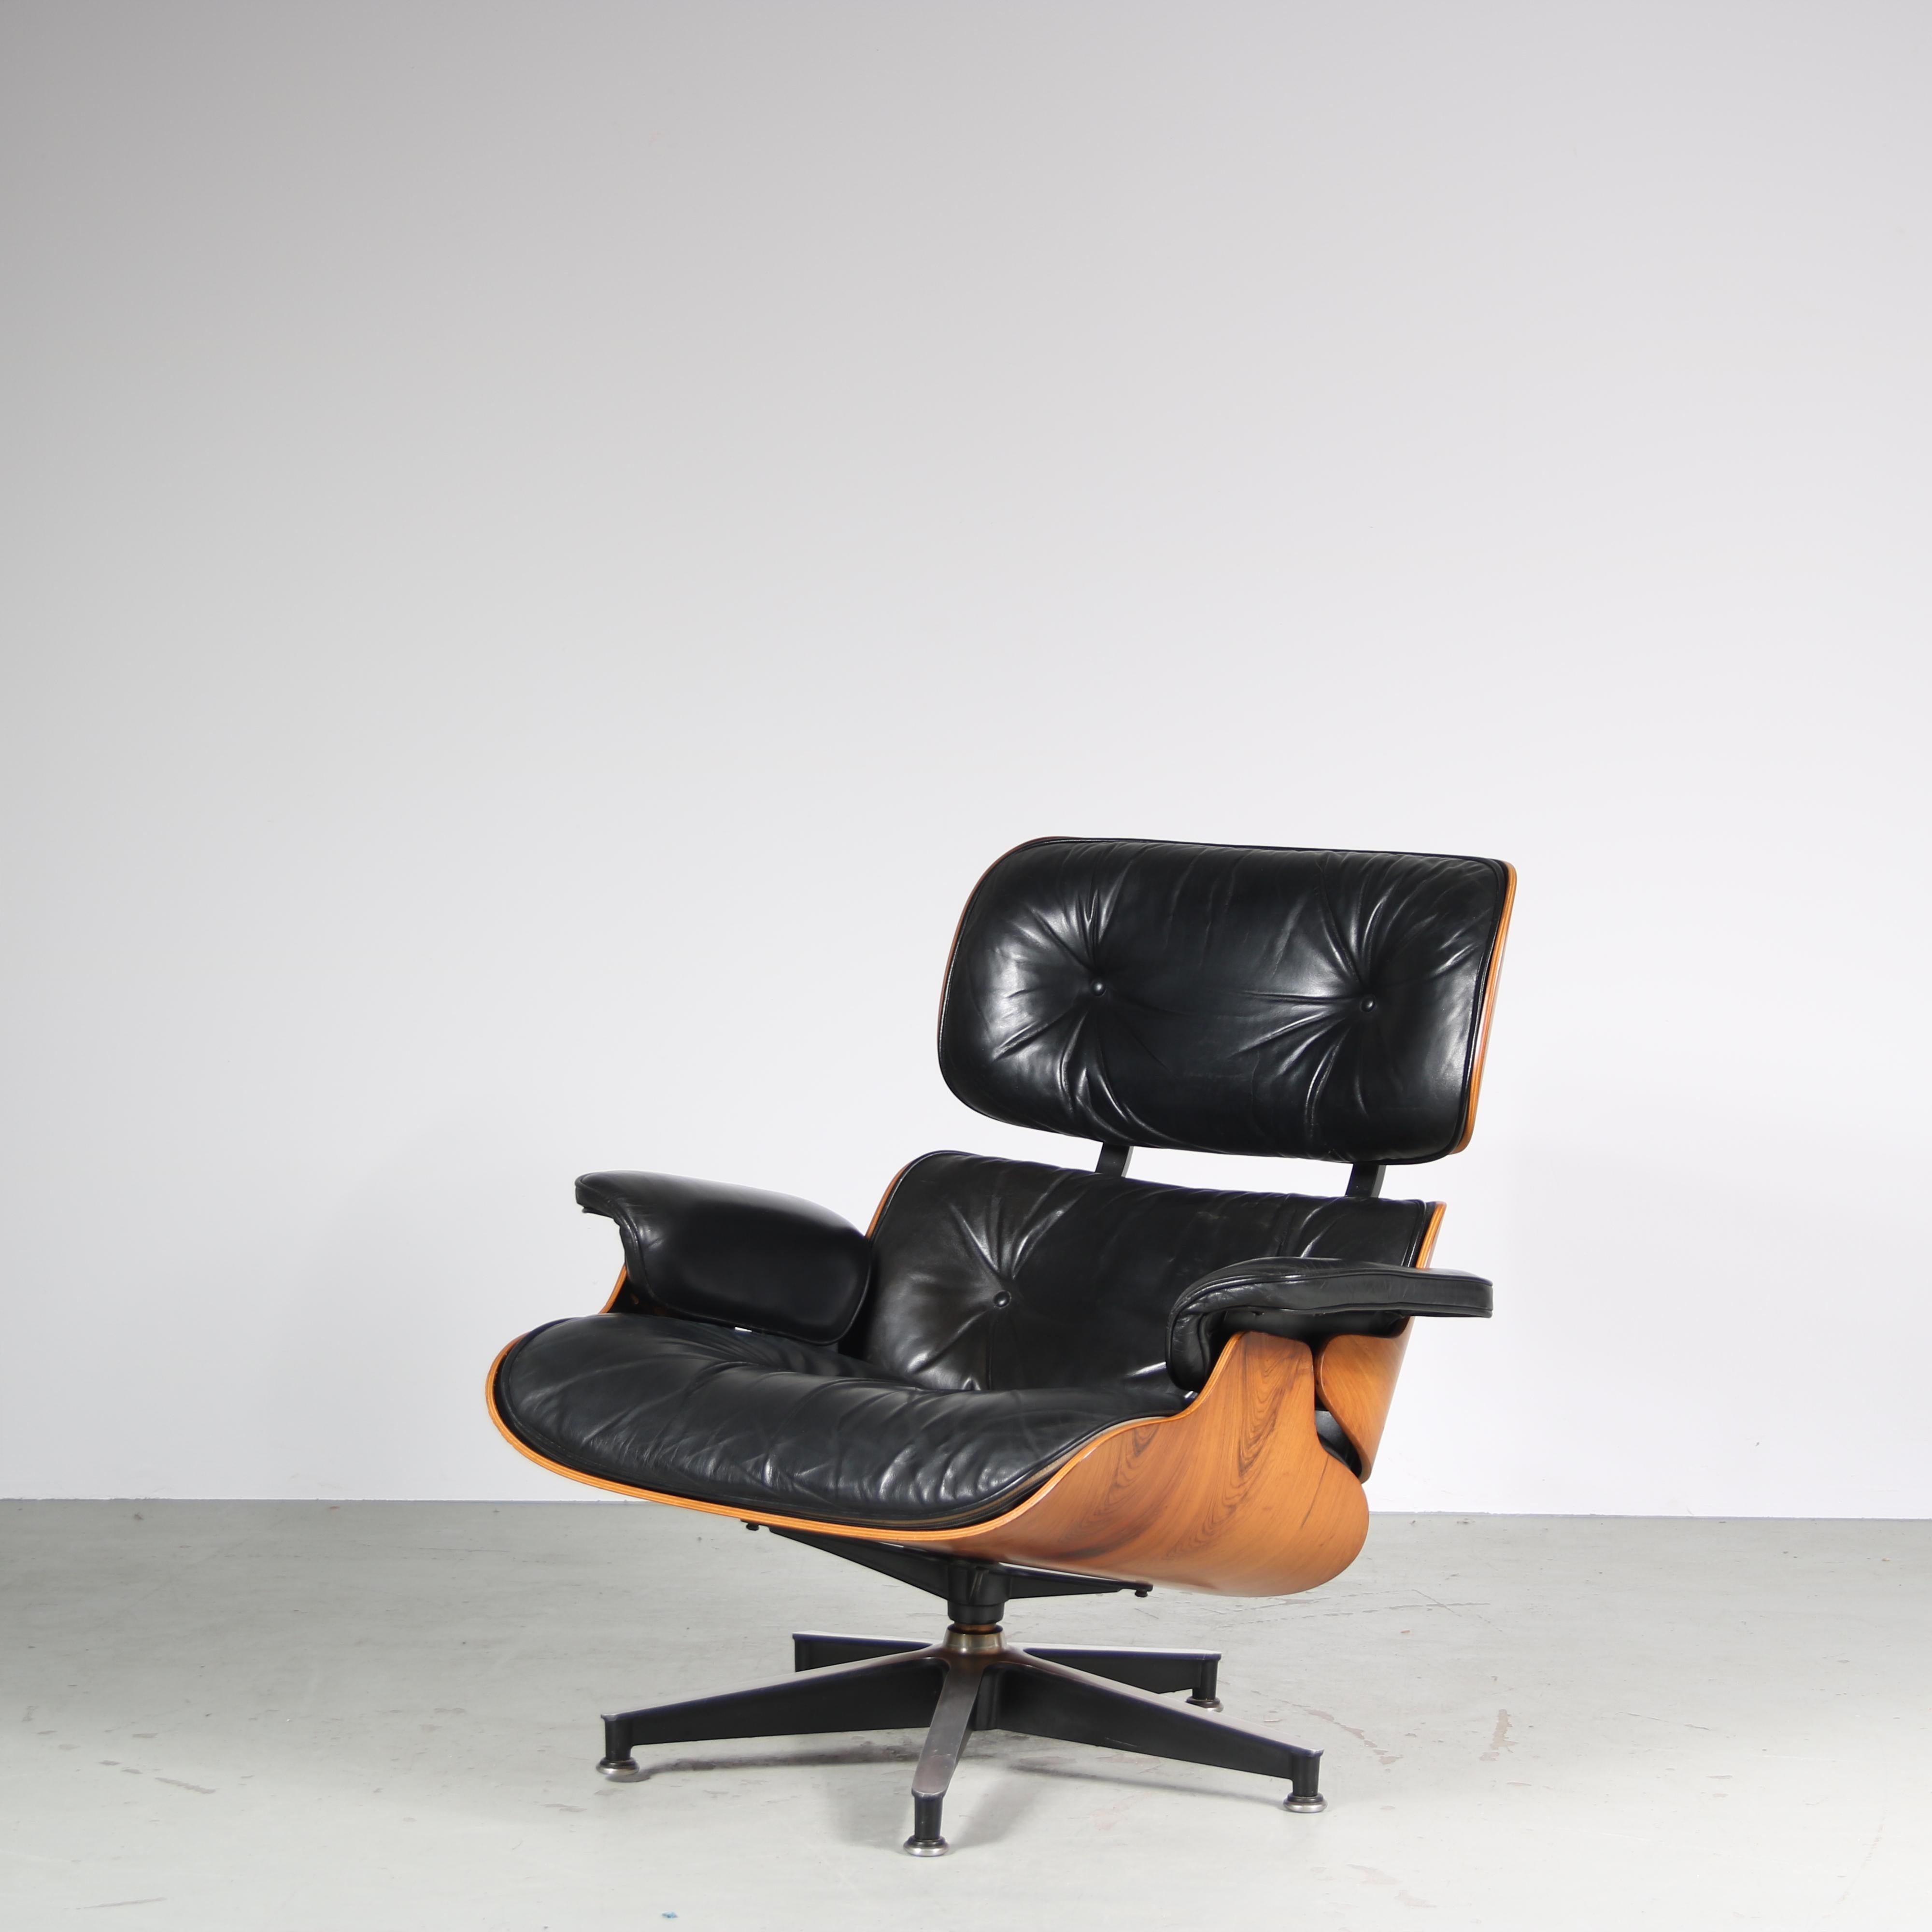 

This lounge chair was designed by Charles & Ray Eames and manufactured by Herman Miller in the United States.

It is a true masterpiece of design. Its iconic deep brown plywooden shell provides an incredibly stylish and comfortable seating